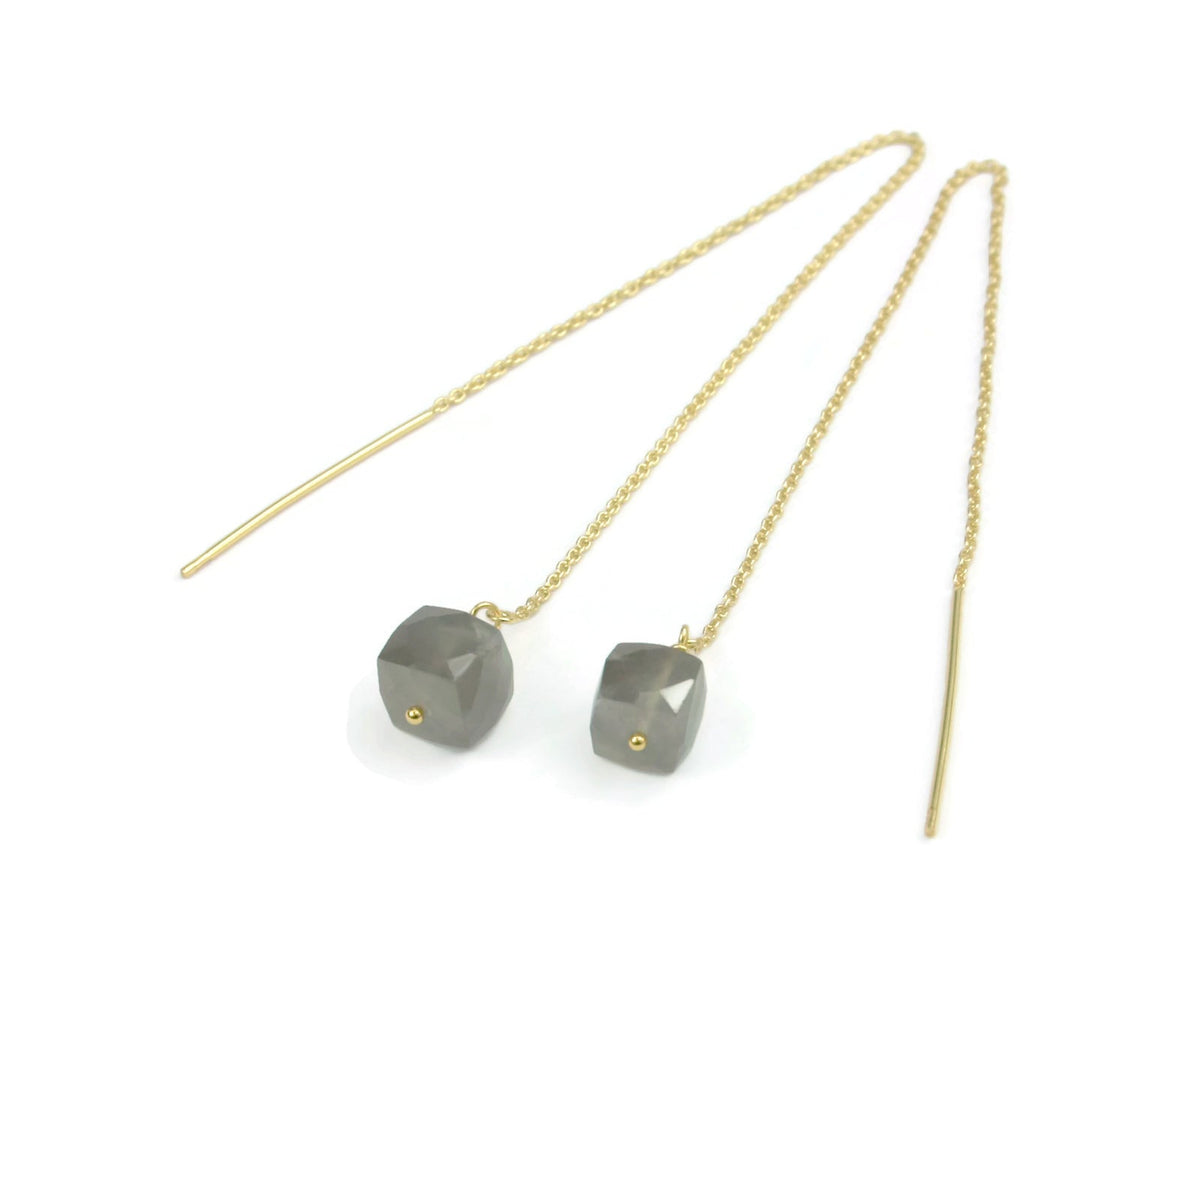 Long Gold Plated Sterling Silver Threaders with Cubic Gemstones